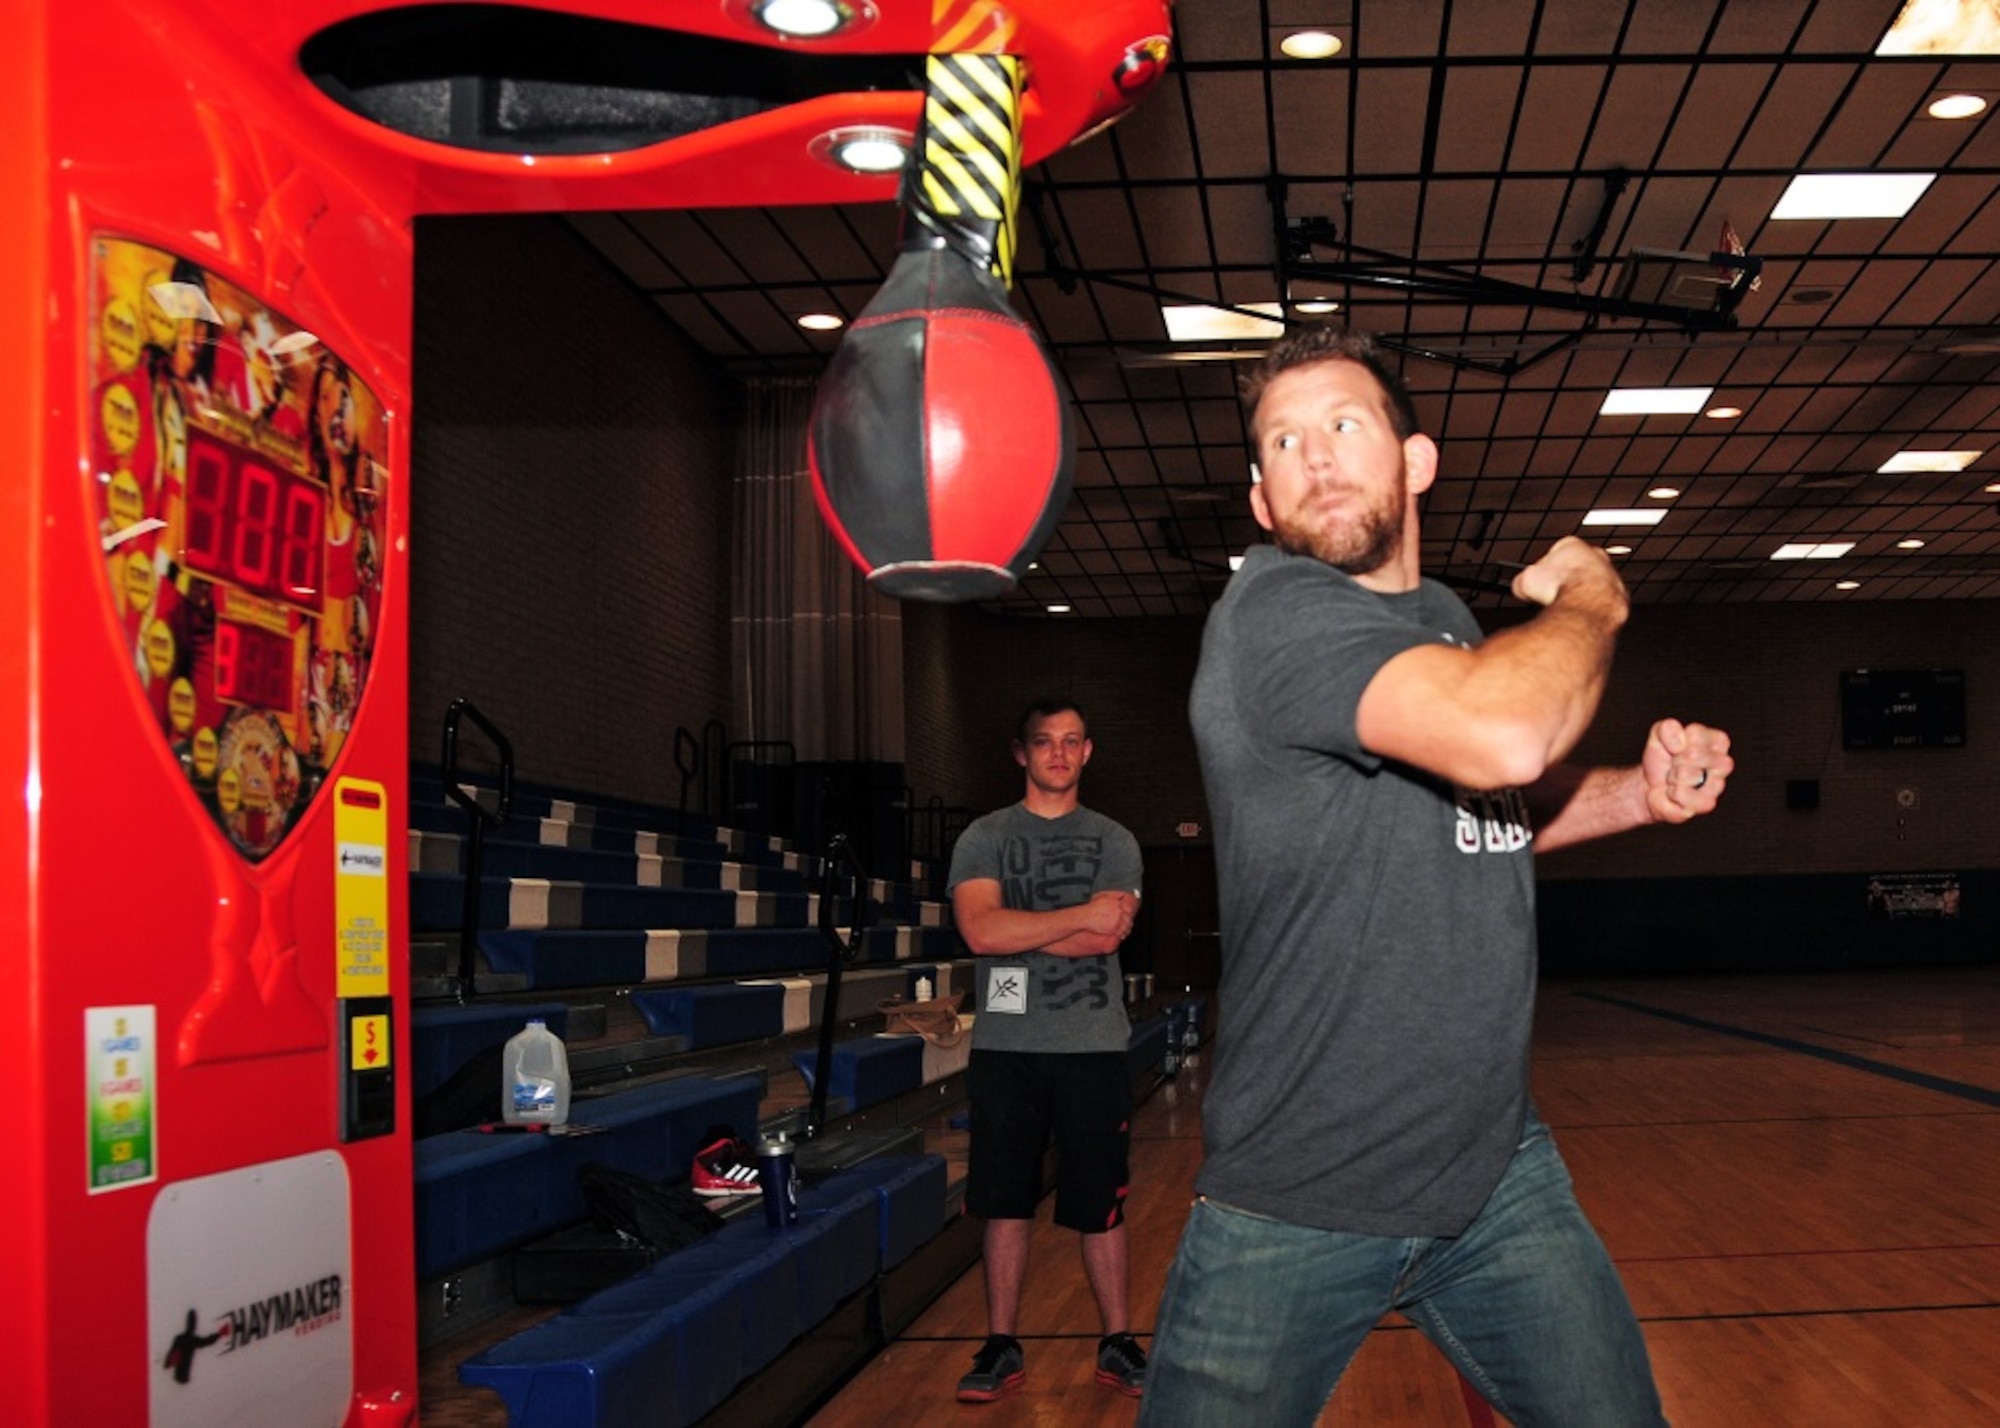 Ryan “Darth” Bader, Ultimate Fighting Champion fighter, takes a swing at the Haymaker vending machine to measure his punching power Mar 21 during the UFC Fitness Tour 2015 at the Bryant Fitness Center, Luke Air Force Base, Ariz. (U.S. Air Force photo taken by Tech. Sgt. Louis Vega Jr.)
